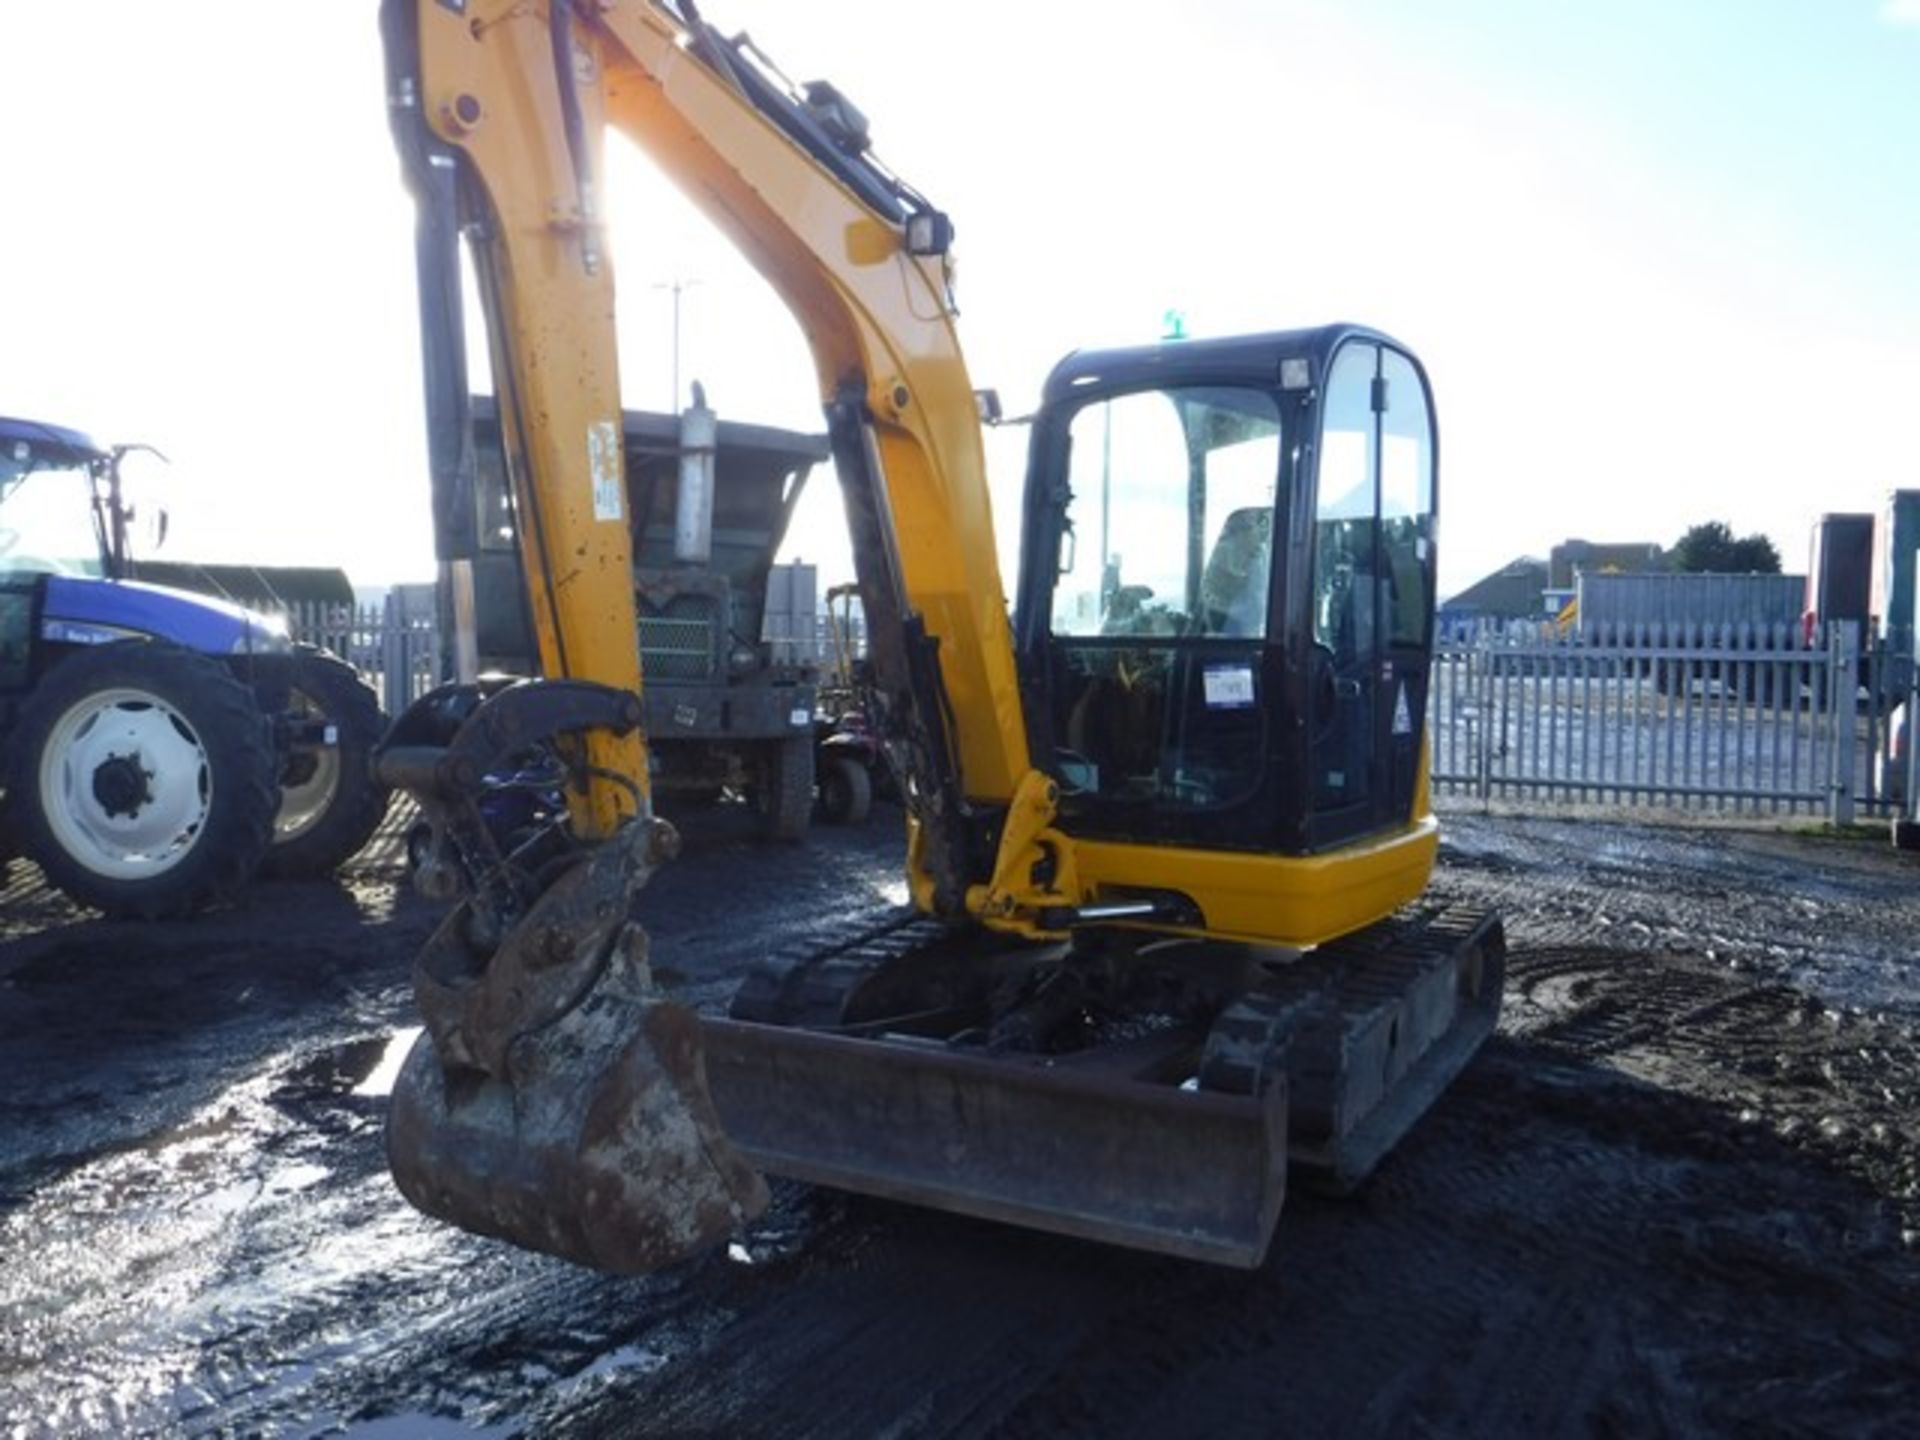 JCB 8050 RTS DIGGER 2015 C/W BUCKET 2103 HRS (NOT BERIFIED) - Image 2 of 7